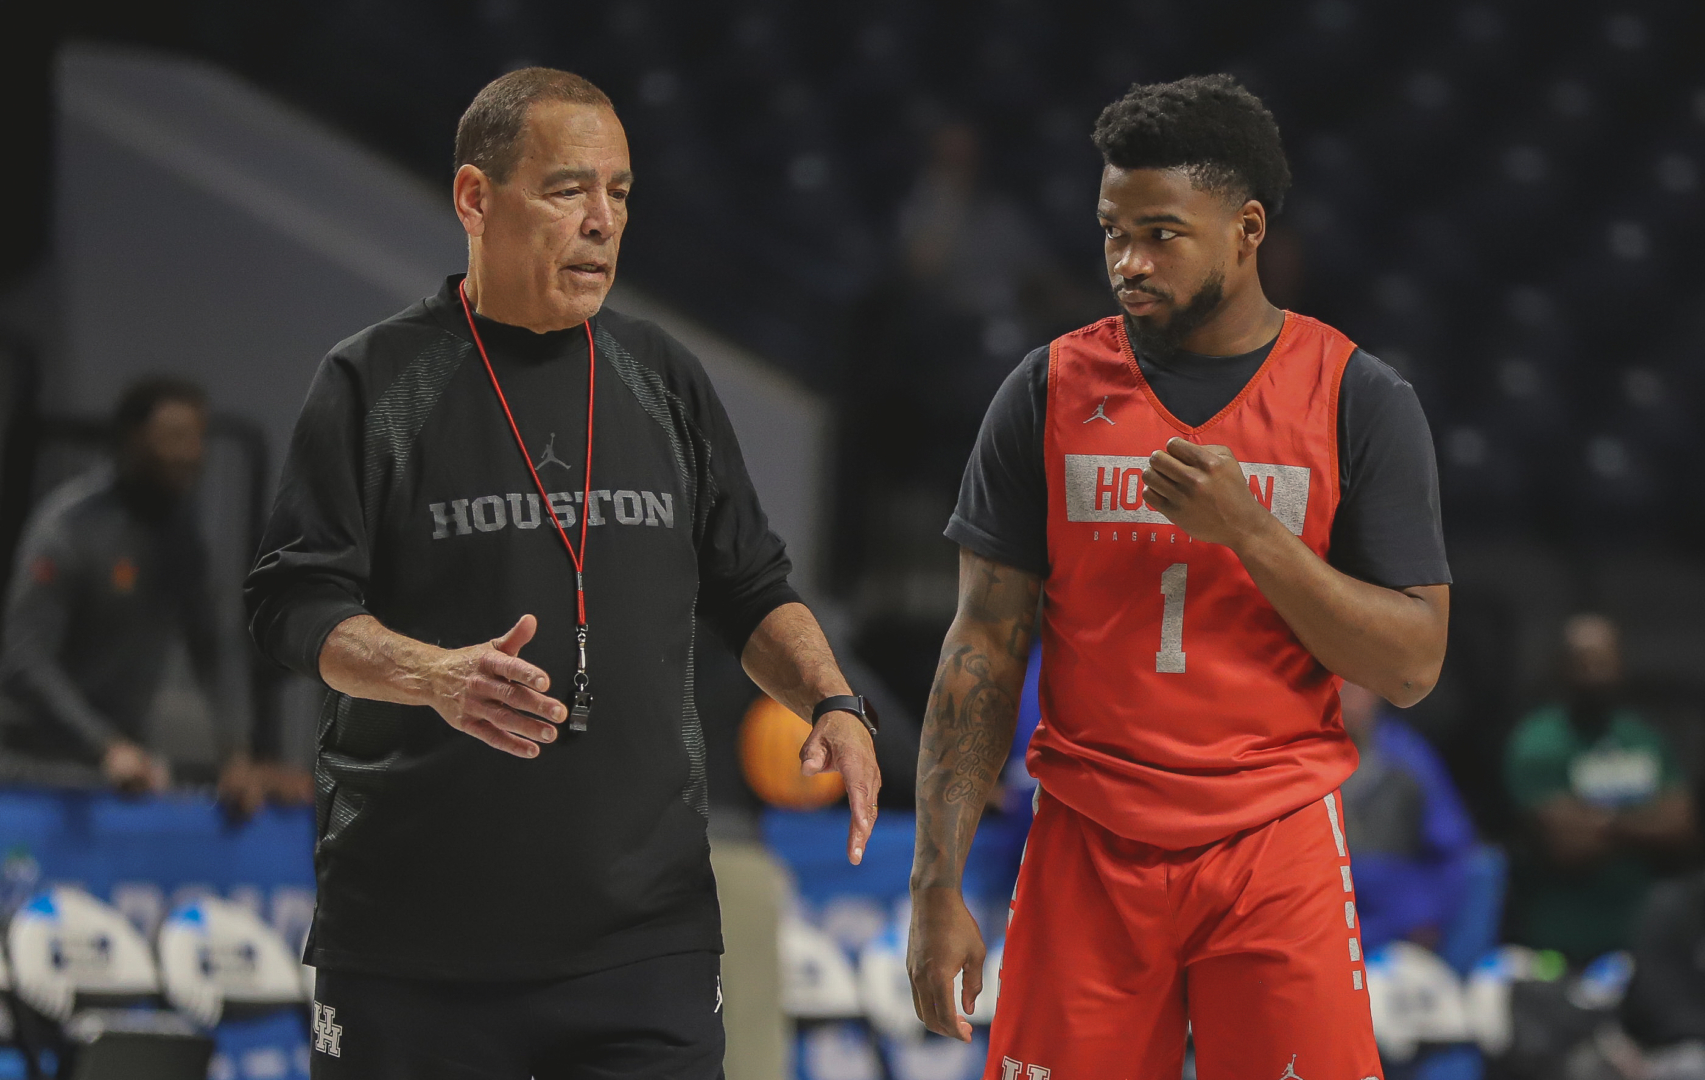 After staying relatively healthy all season, the injury bug has bitten the UH basketball team hard over the past week. | Anh Le/The Cougar